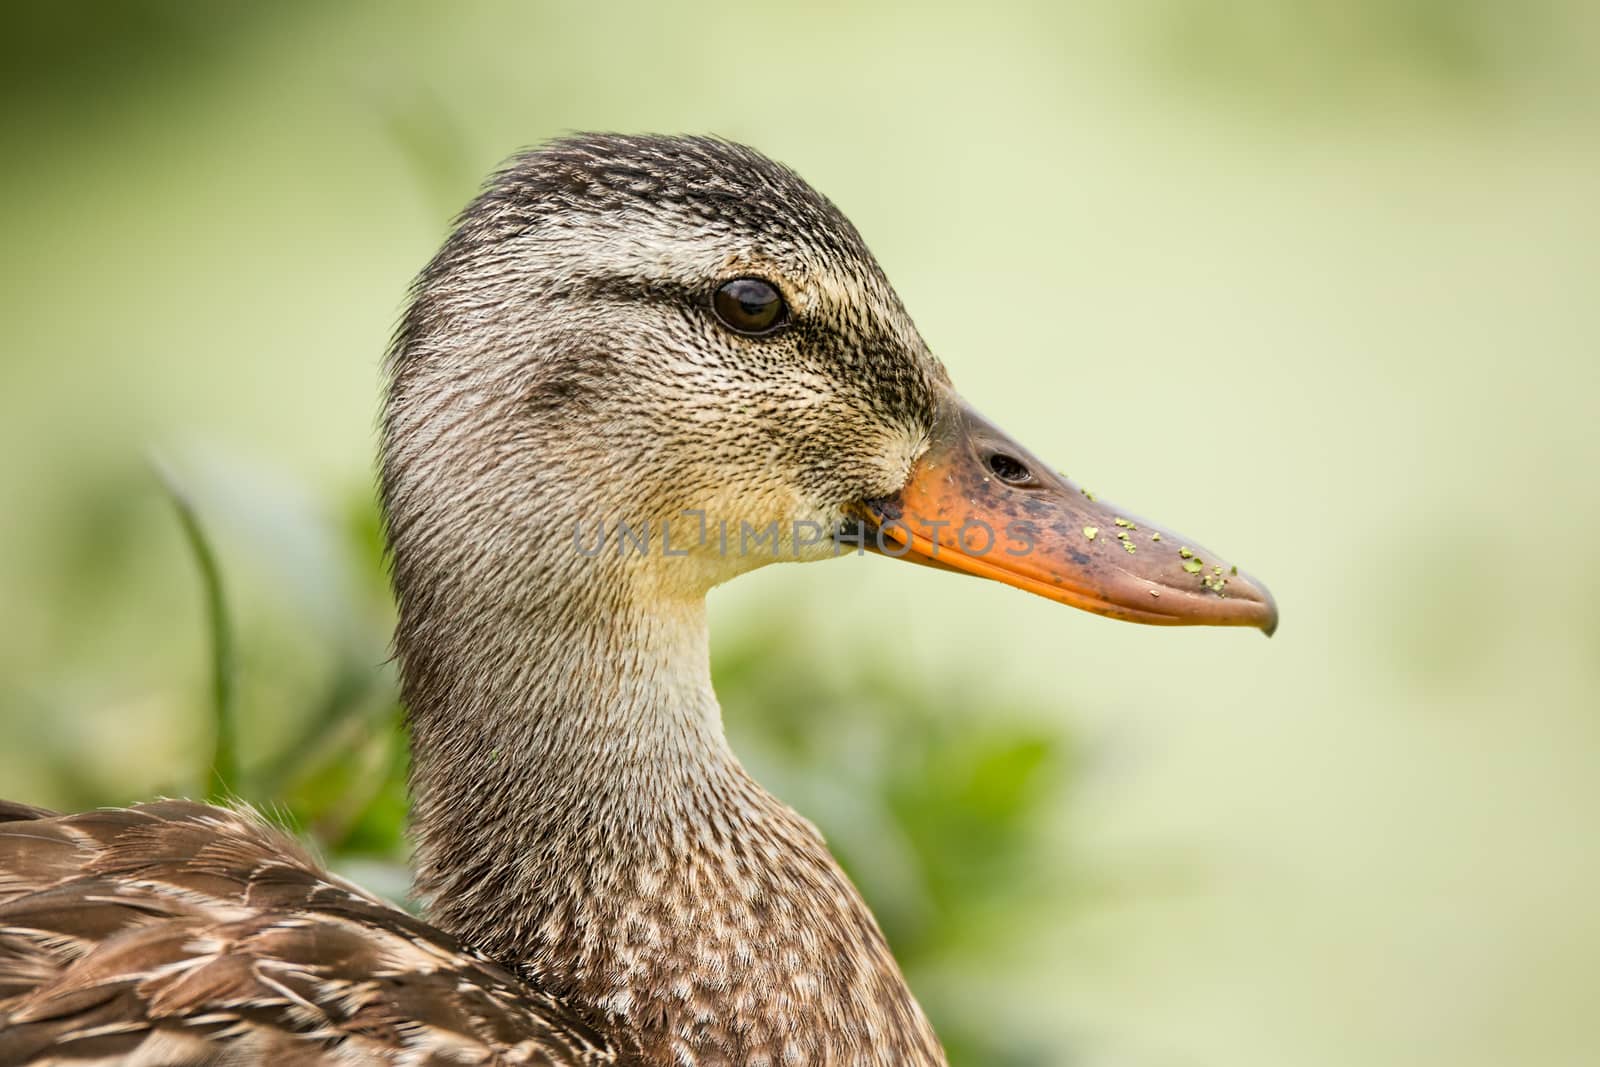 Female Duck Profile With Green Plantlife in the Background, Color Image, Day